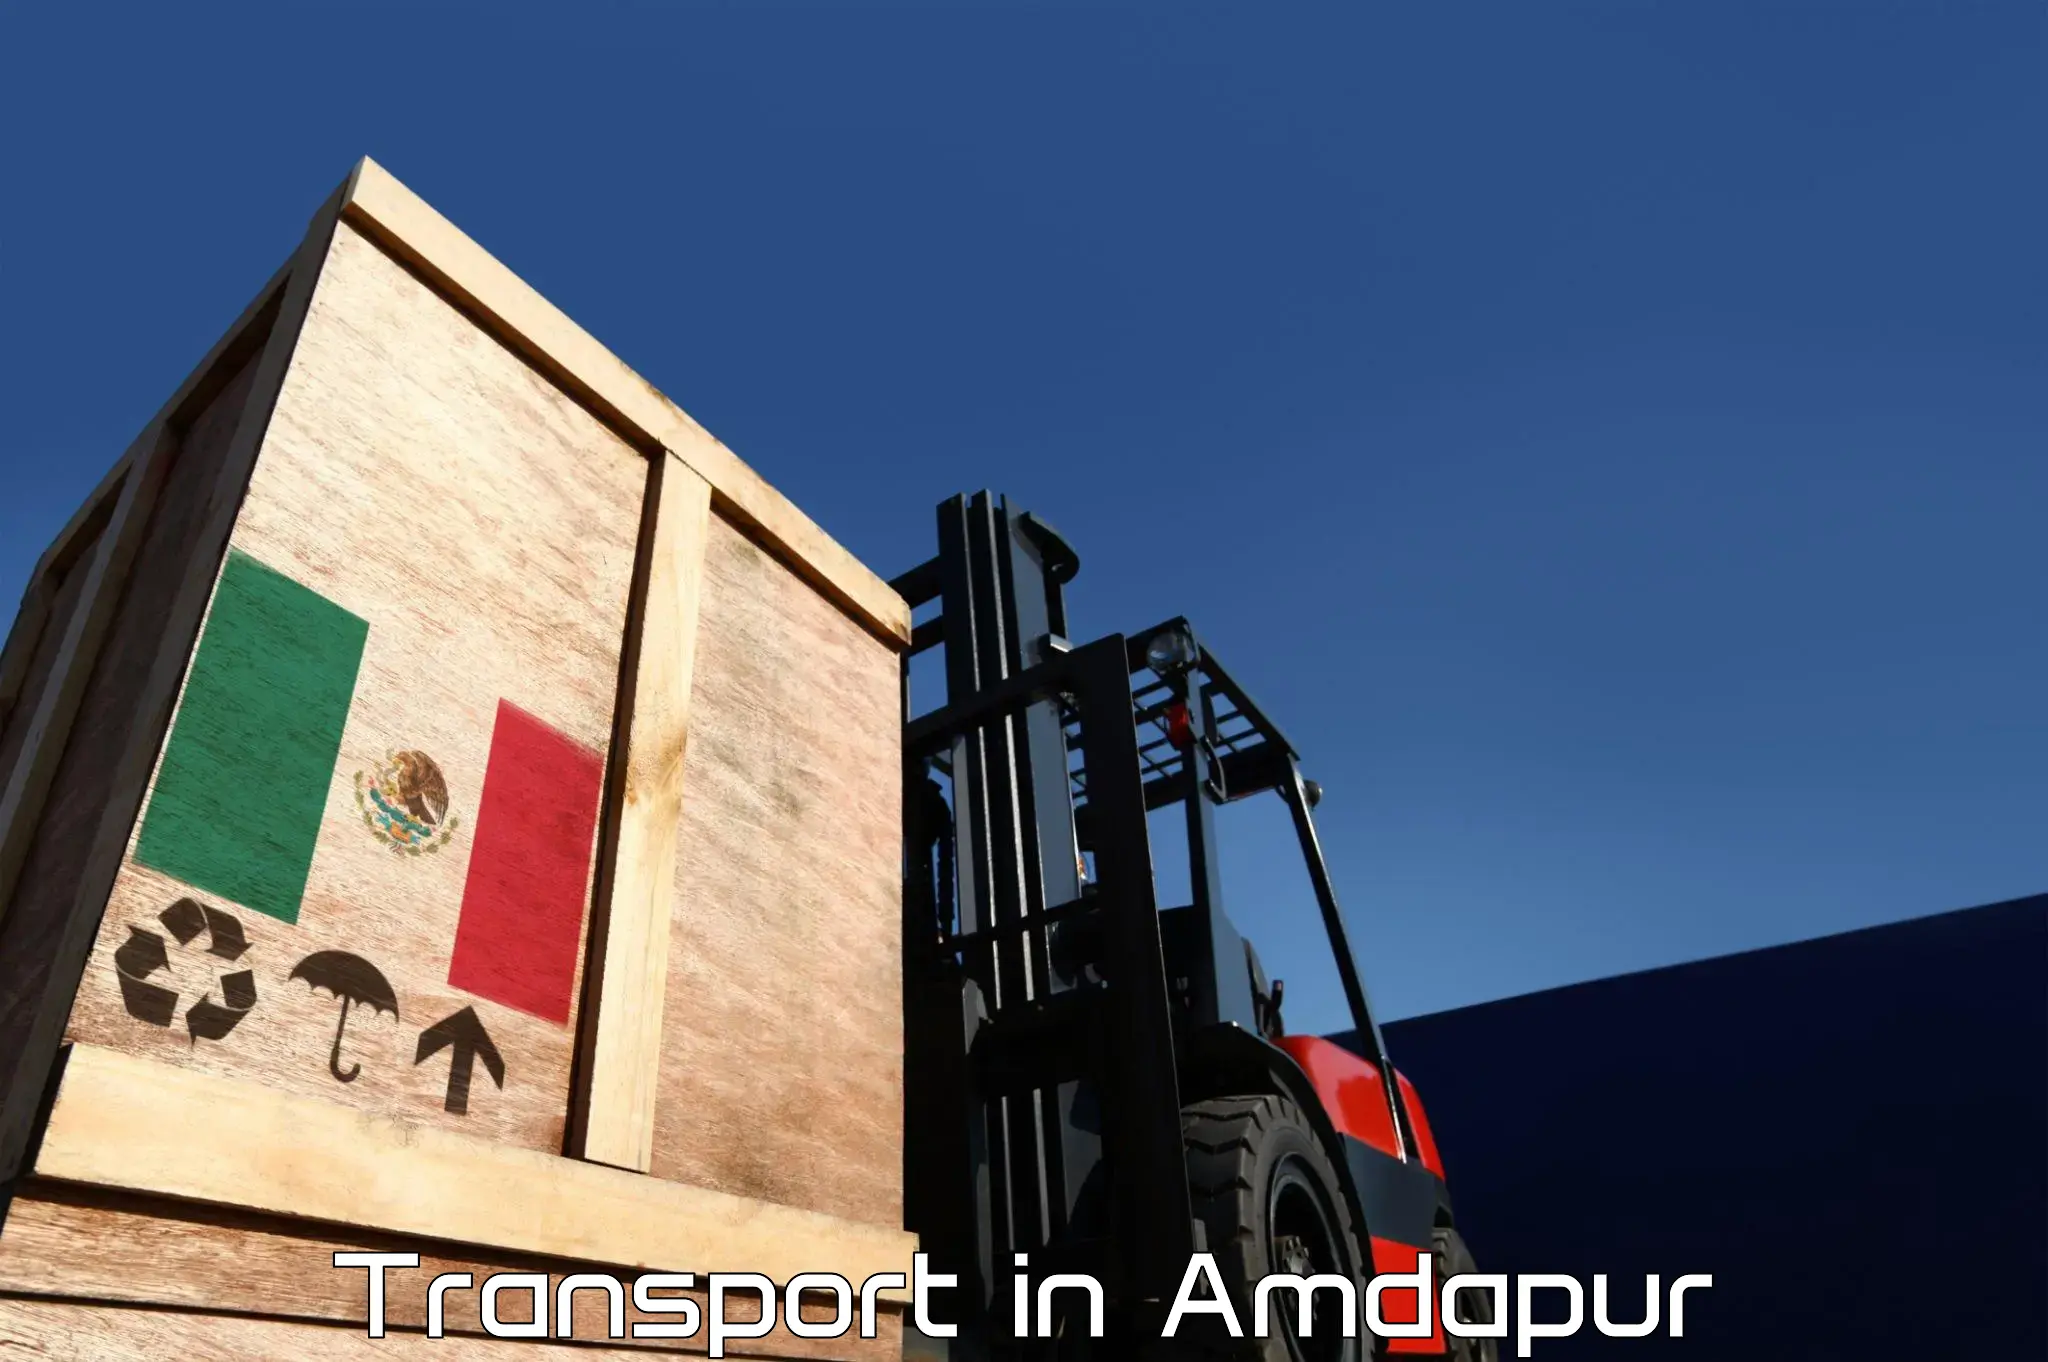 Road transport services in Amdapur